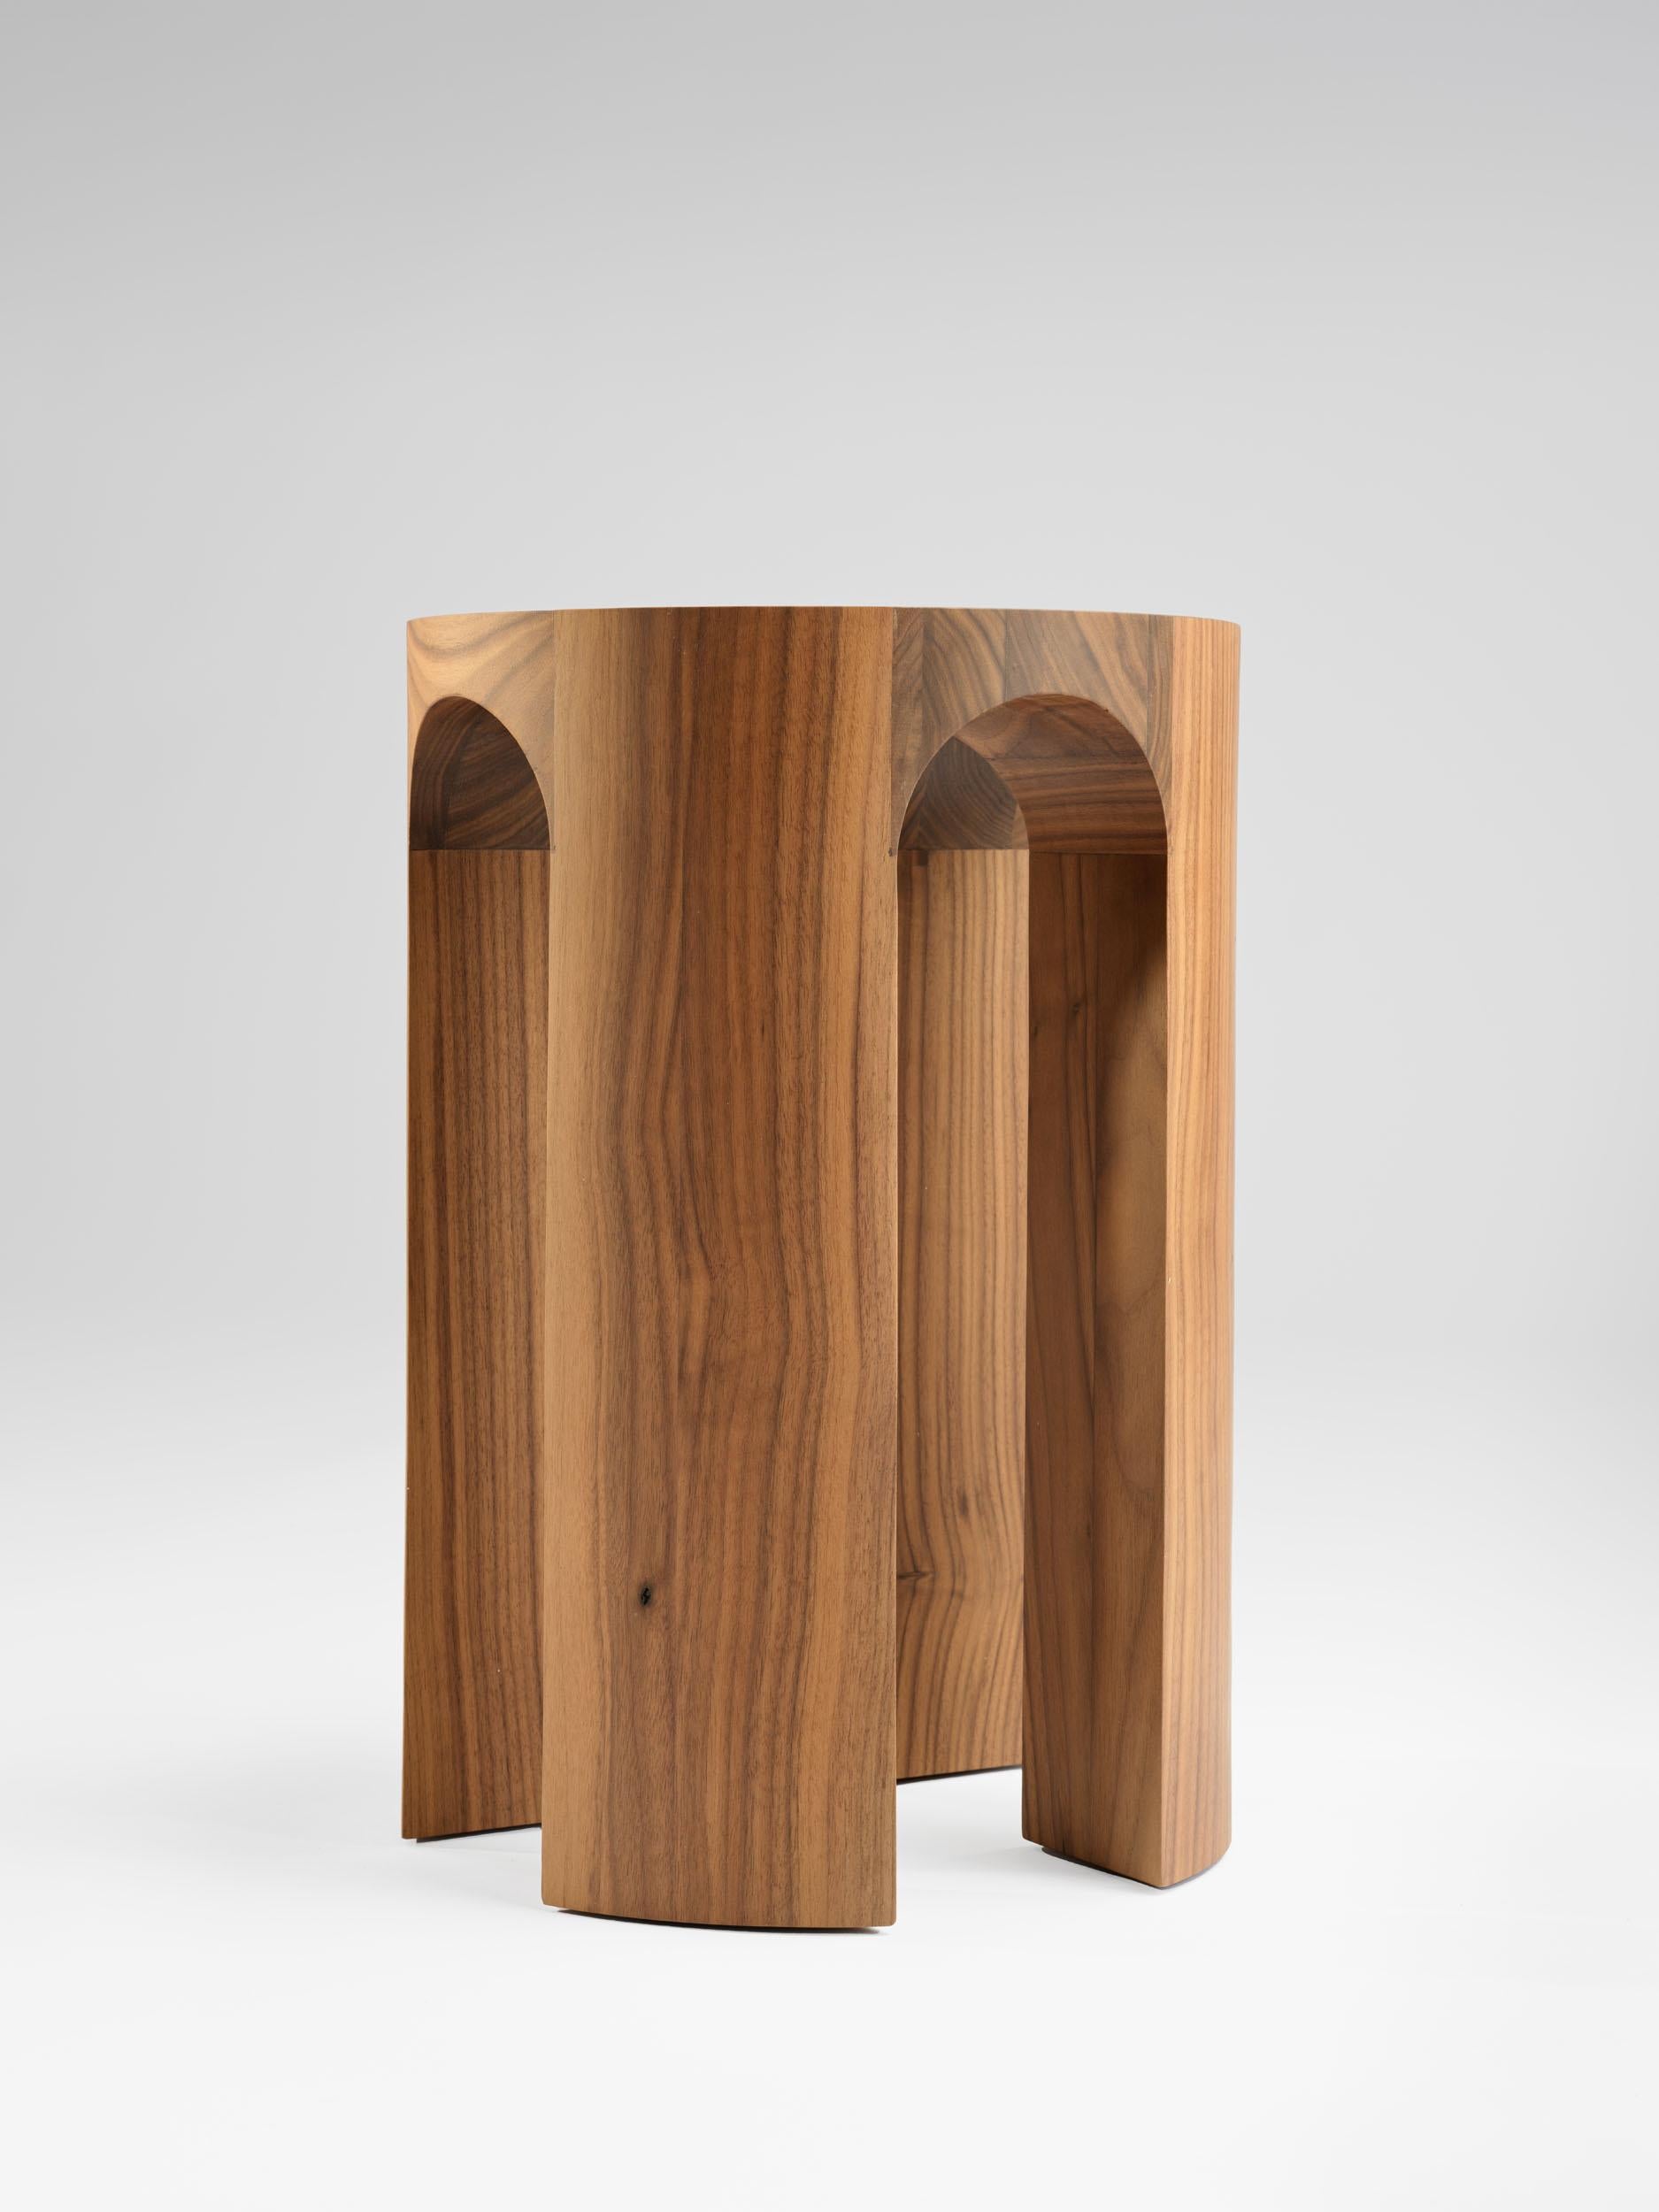 Contemporary Solid American Walnut Arcus Stool by Tim Vranken For Sale 6